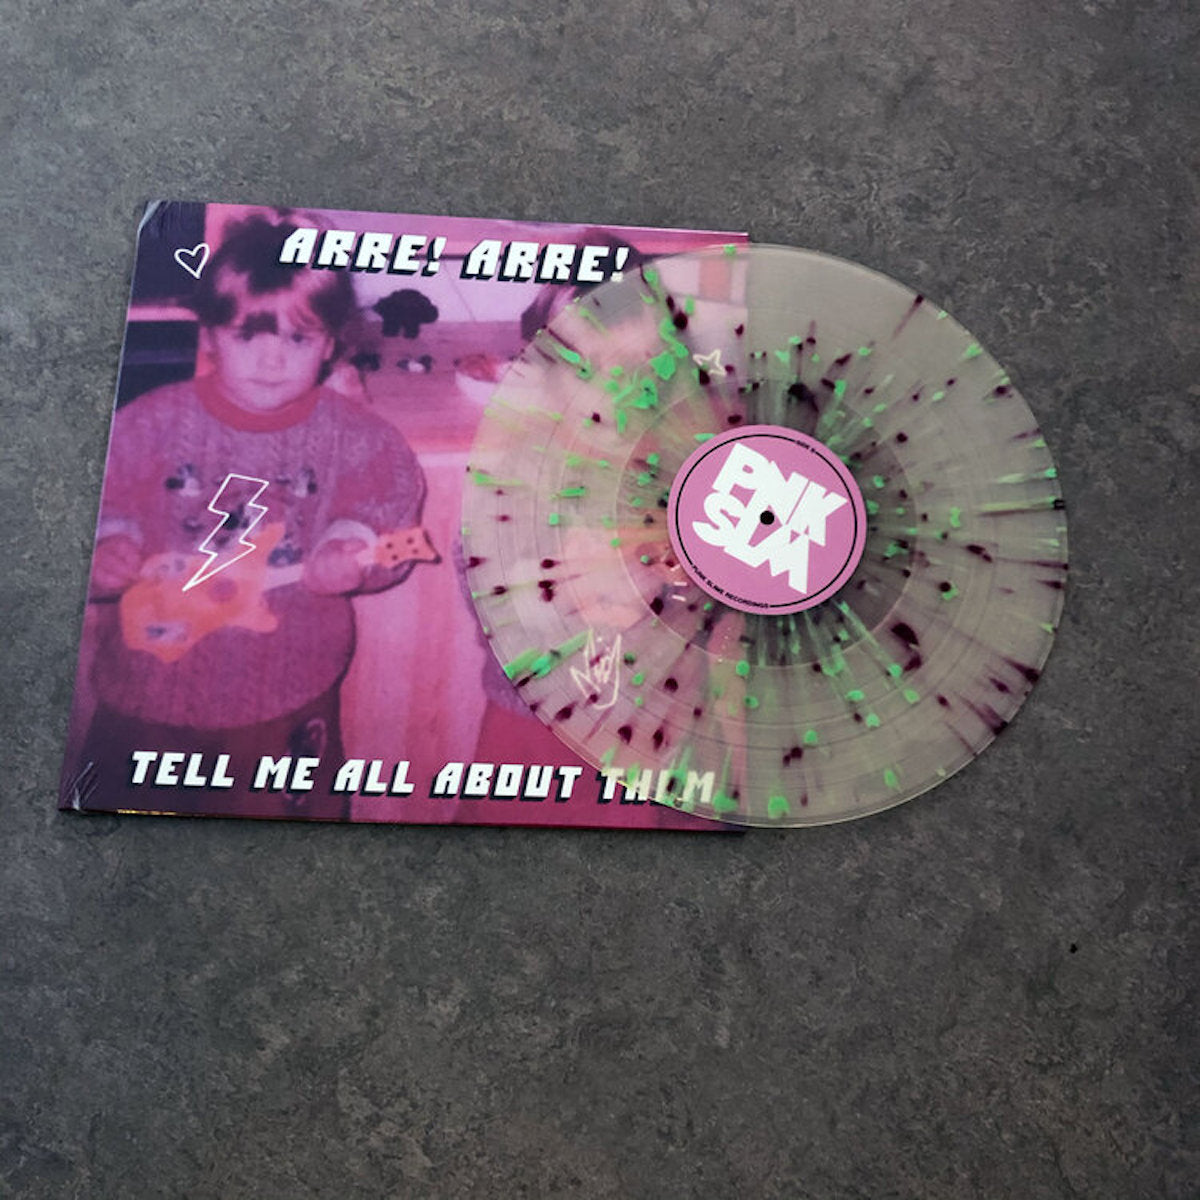 Arre! Arre! - Tell Me All About Them LP